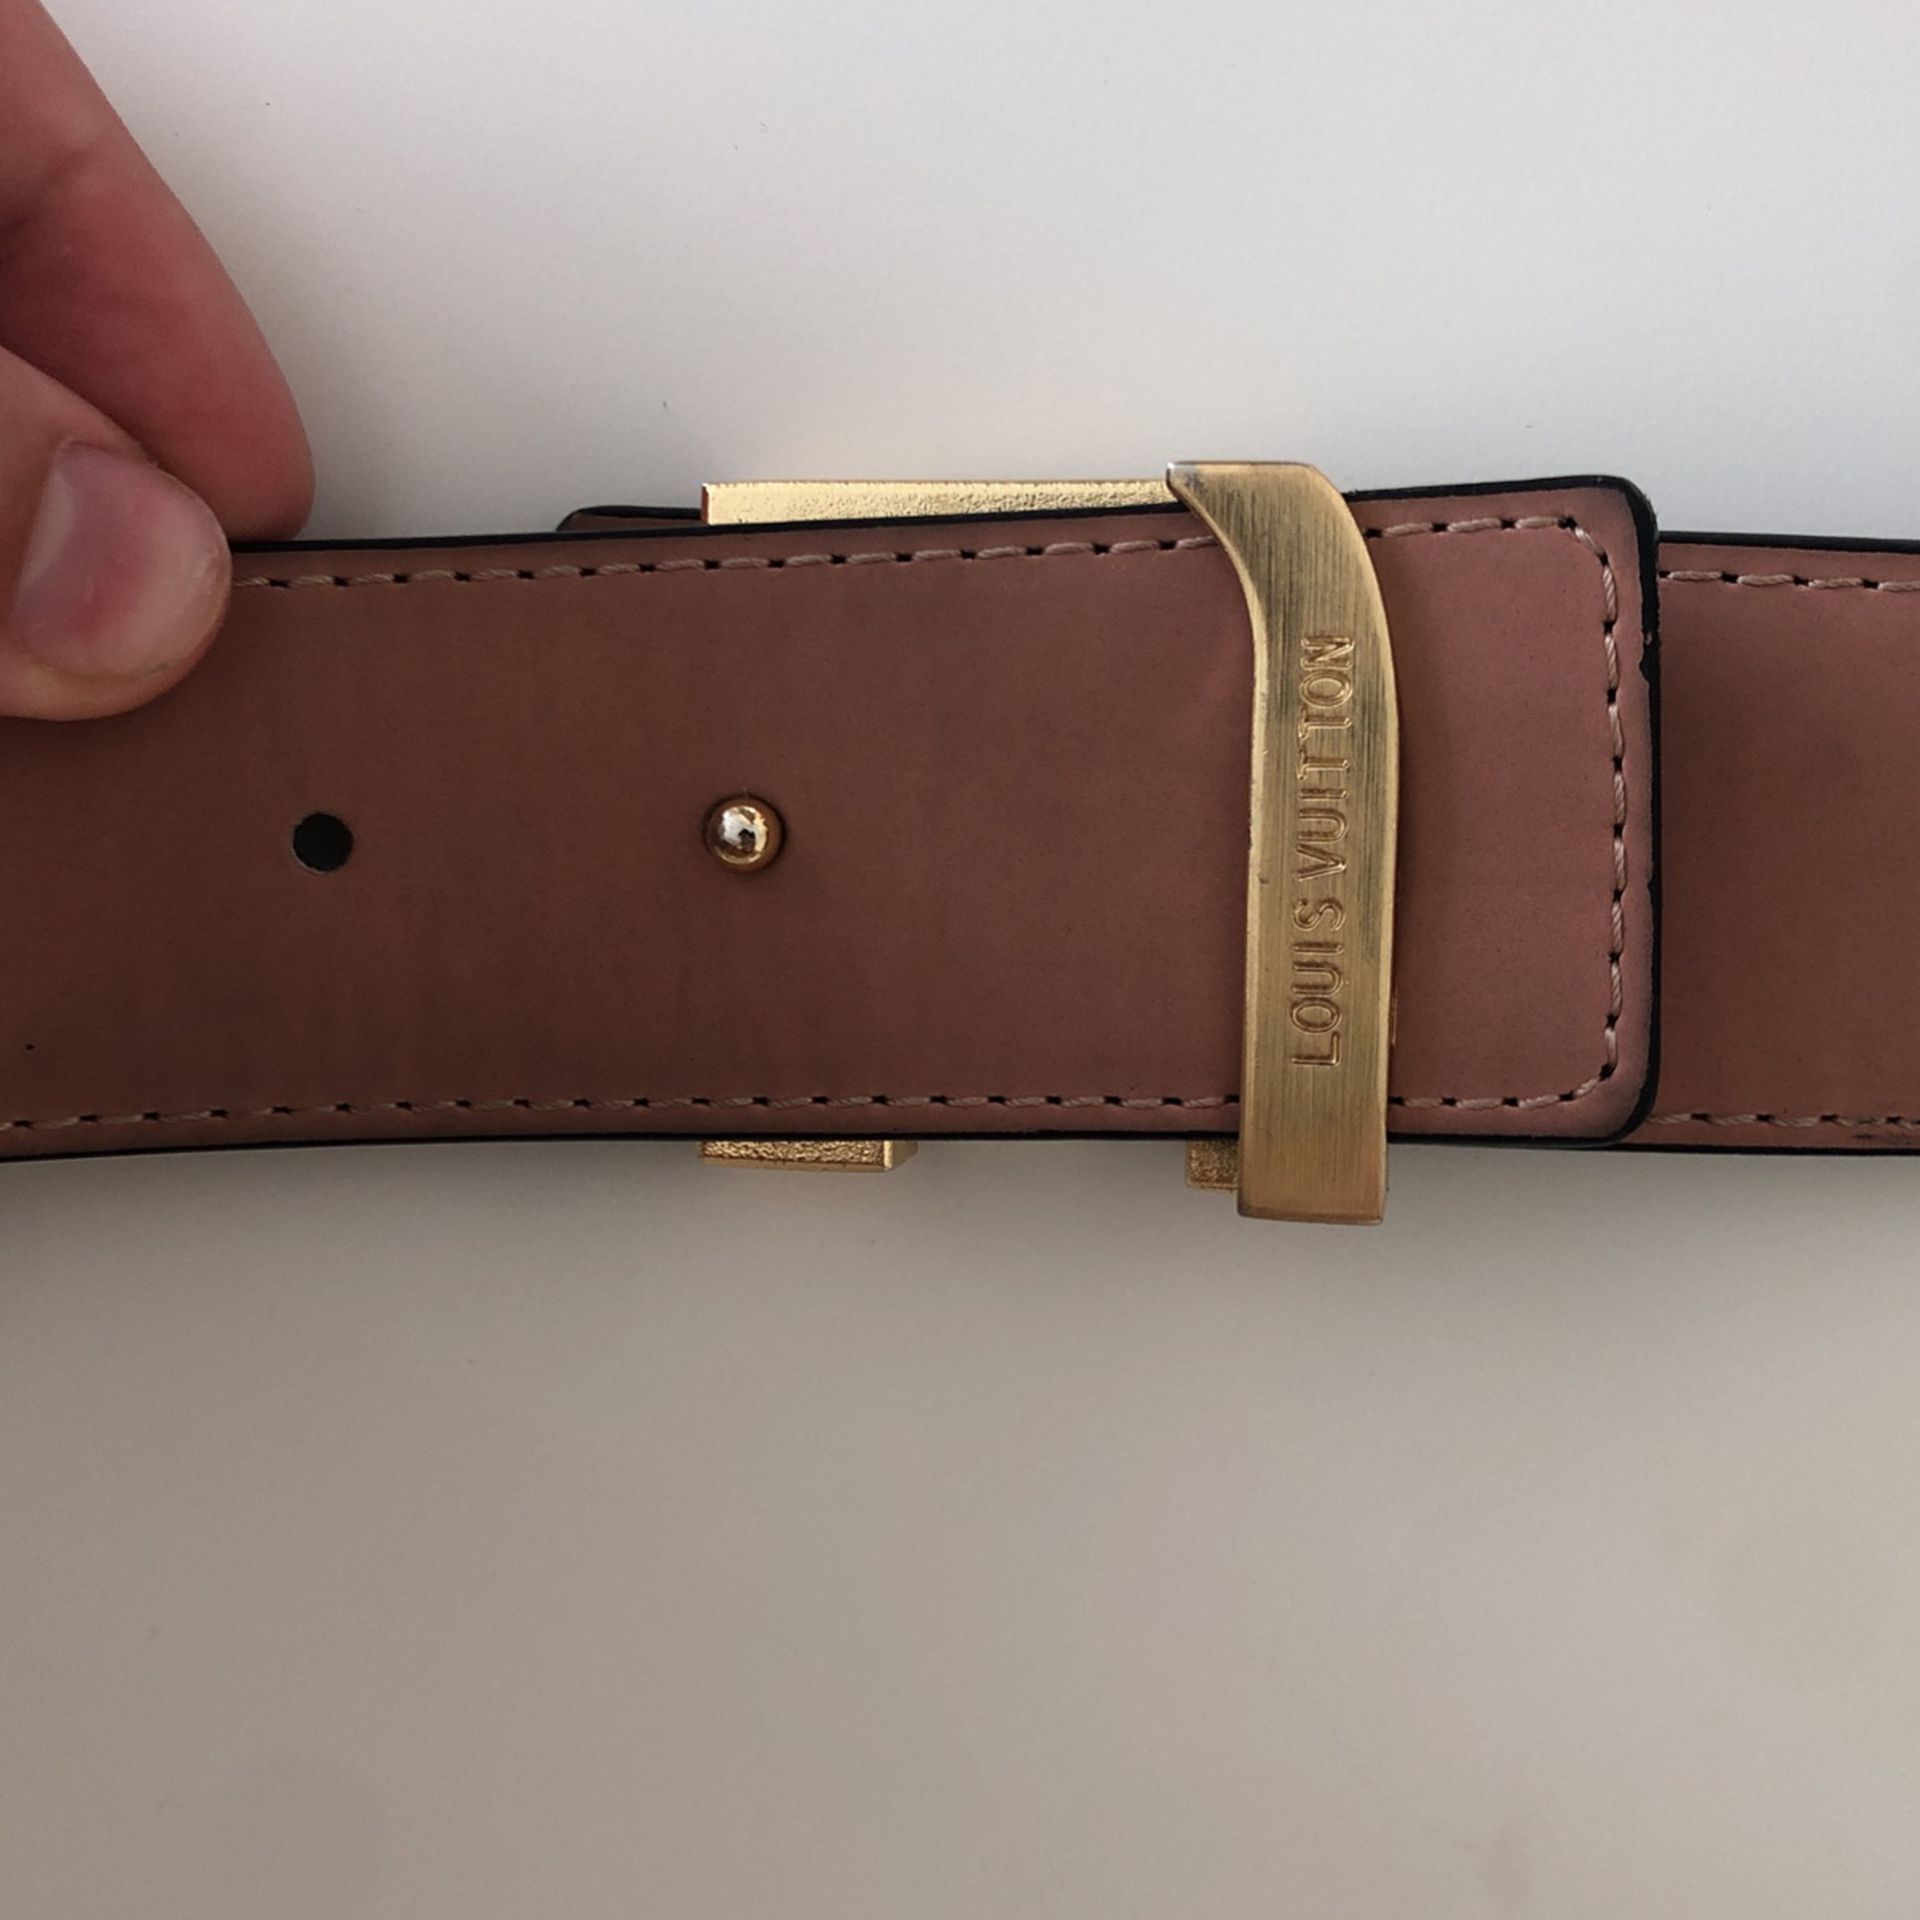 LV Mens Signature Louis Vuitton Paris Monogram Belt Brown and Gold Size 110  - fits 28-32 waist for Sale in Bothell, WA - OfferUp